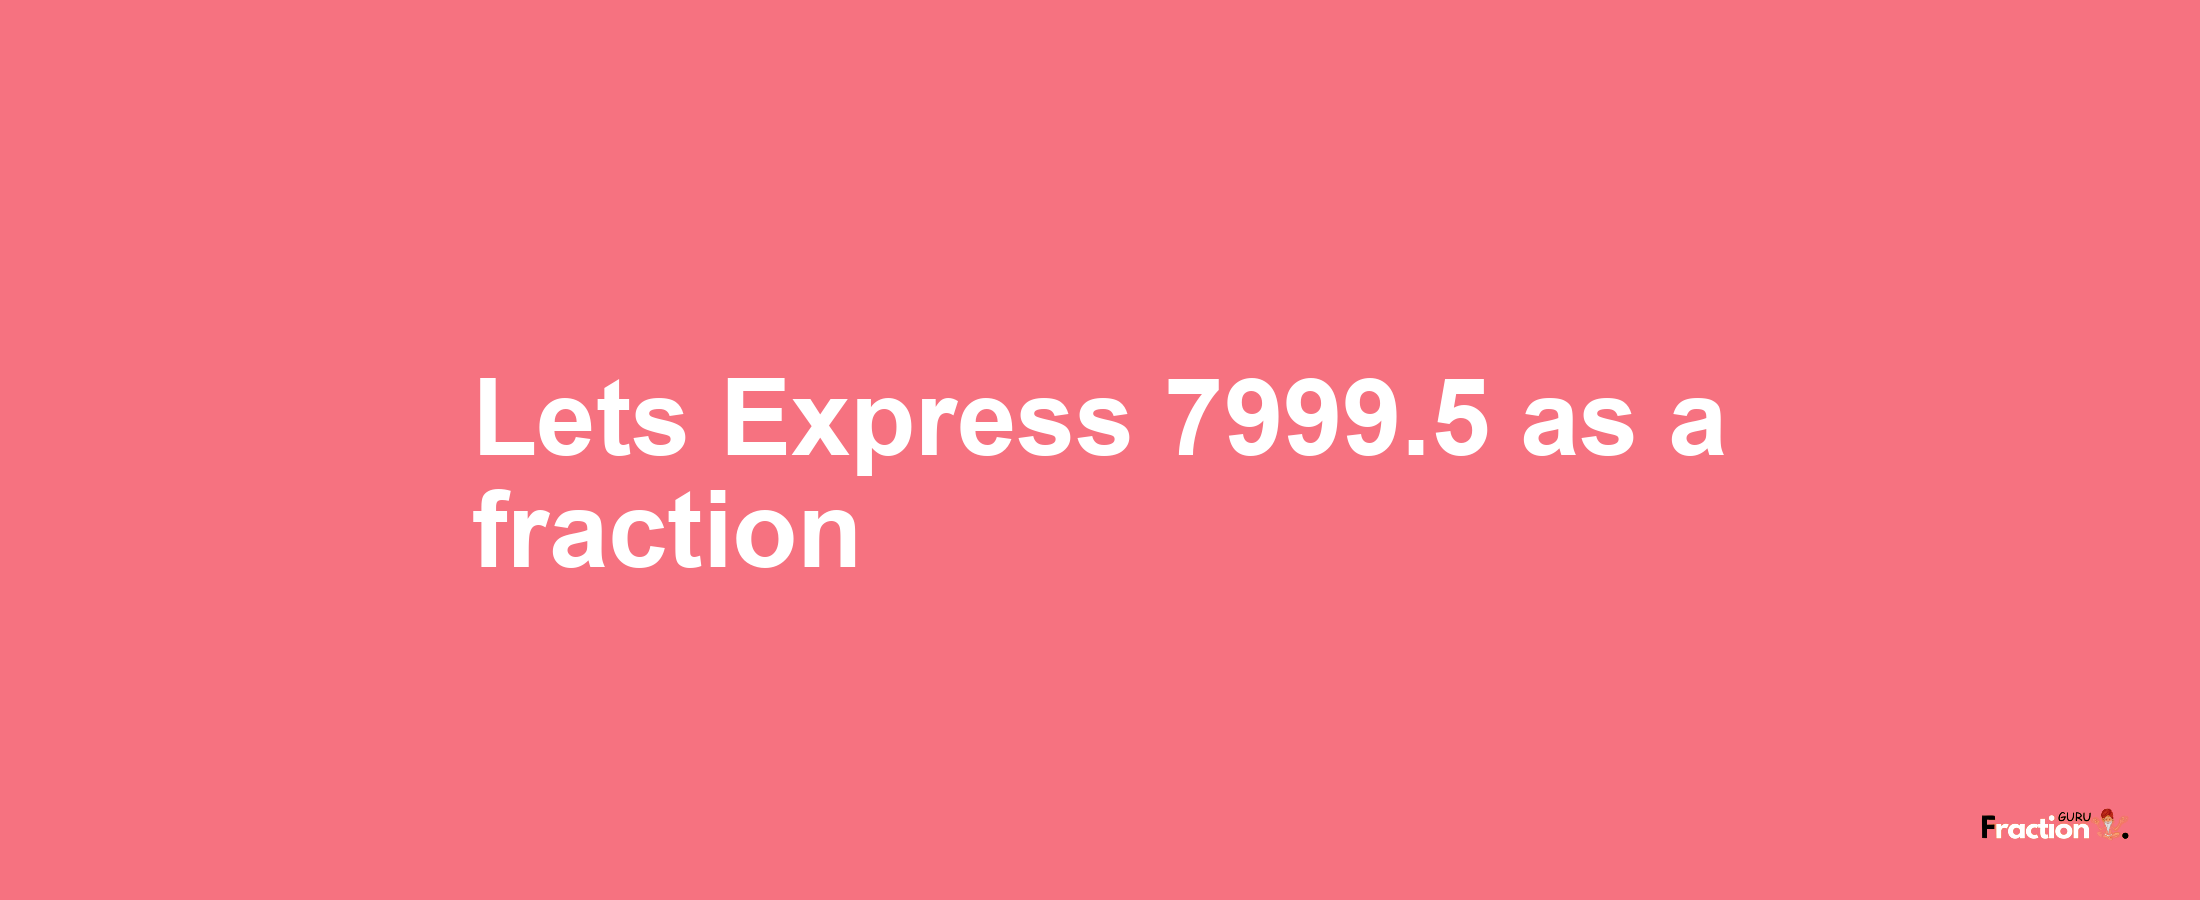 Lets Express 7999.5 as afraction